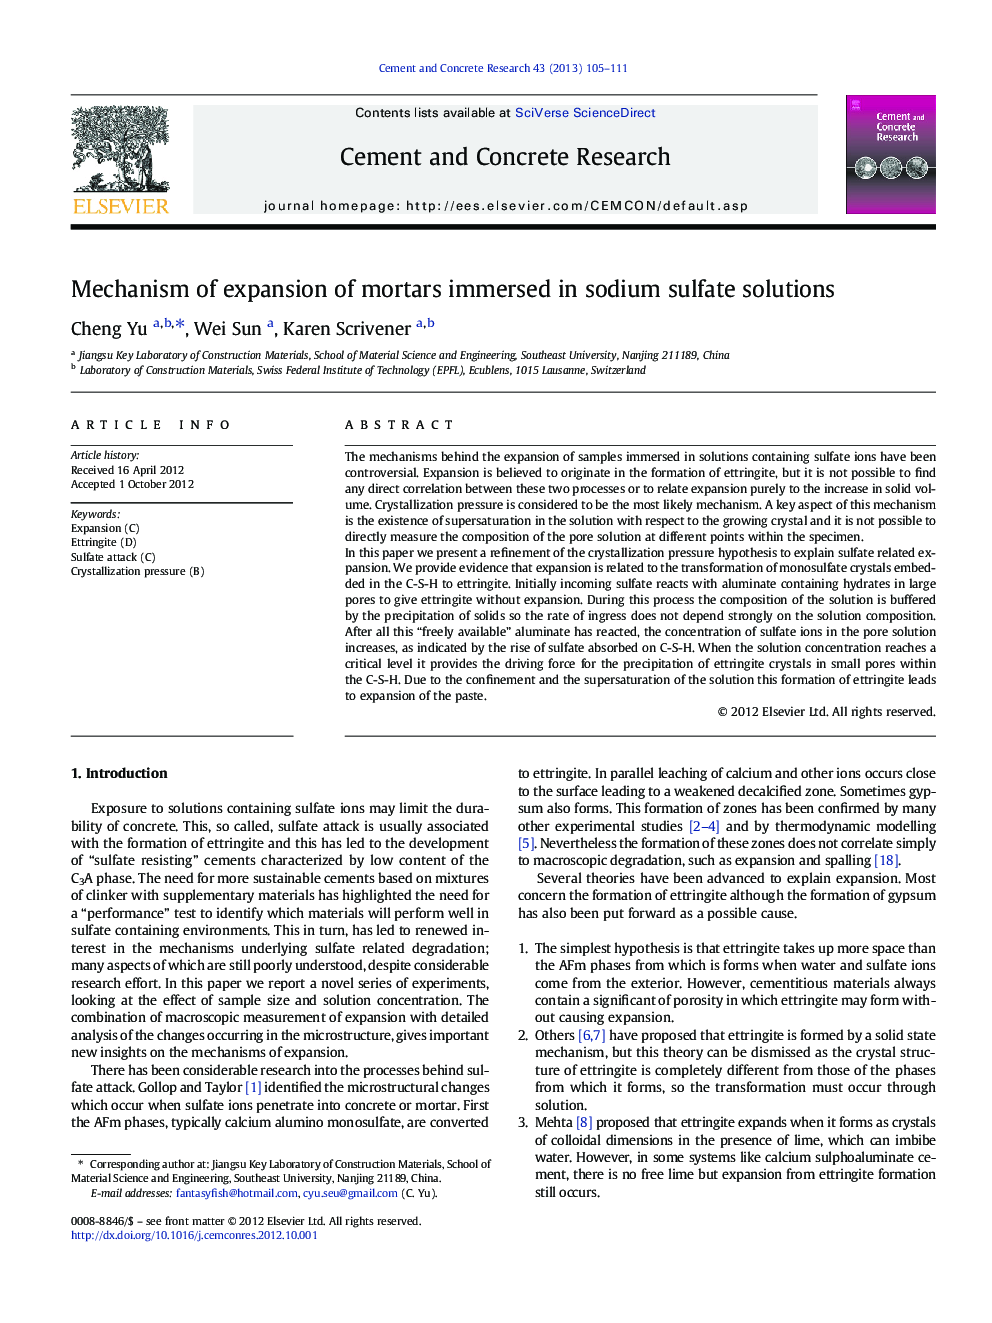 Mechanism of expansion of mortars immersed in sodium sulfate solutions